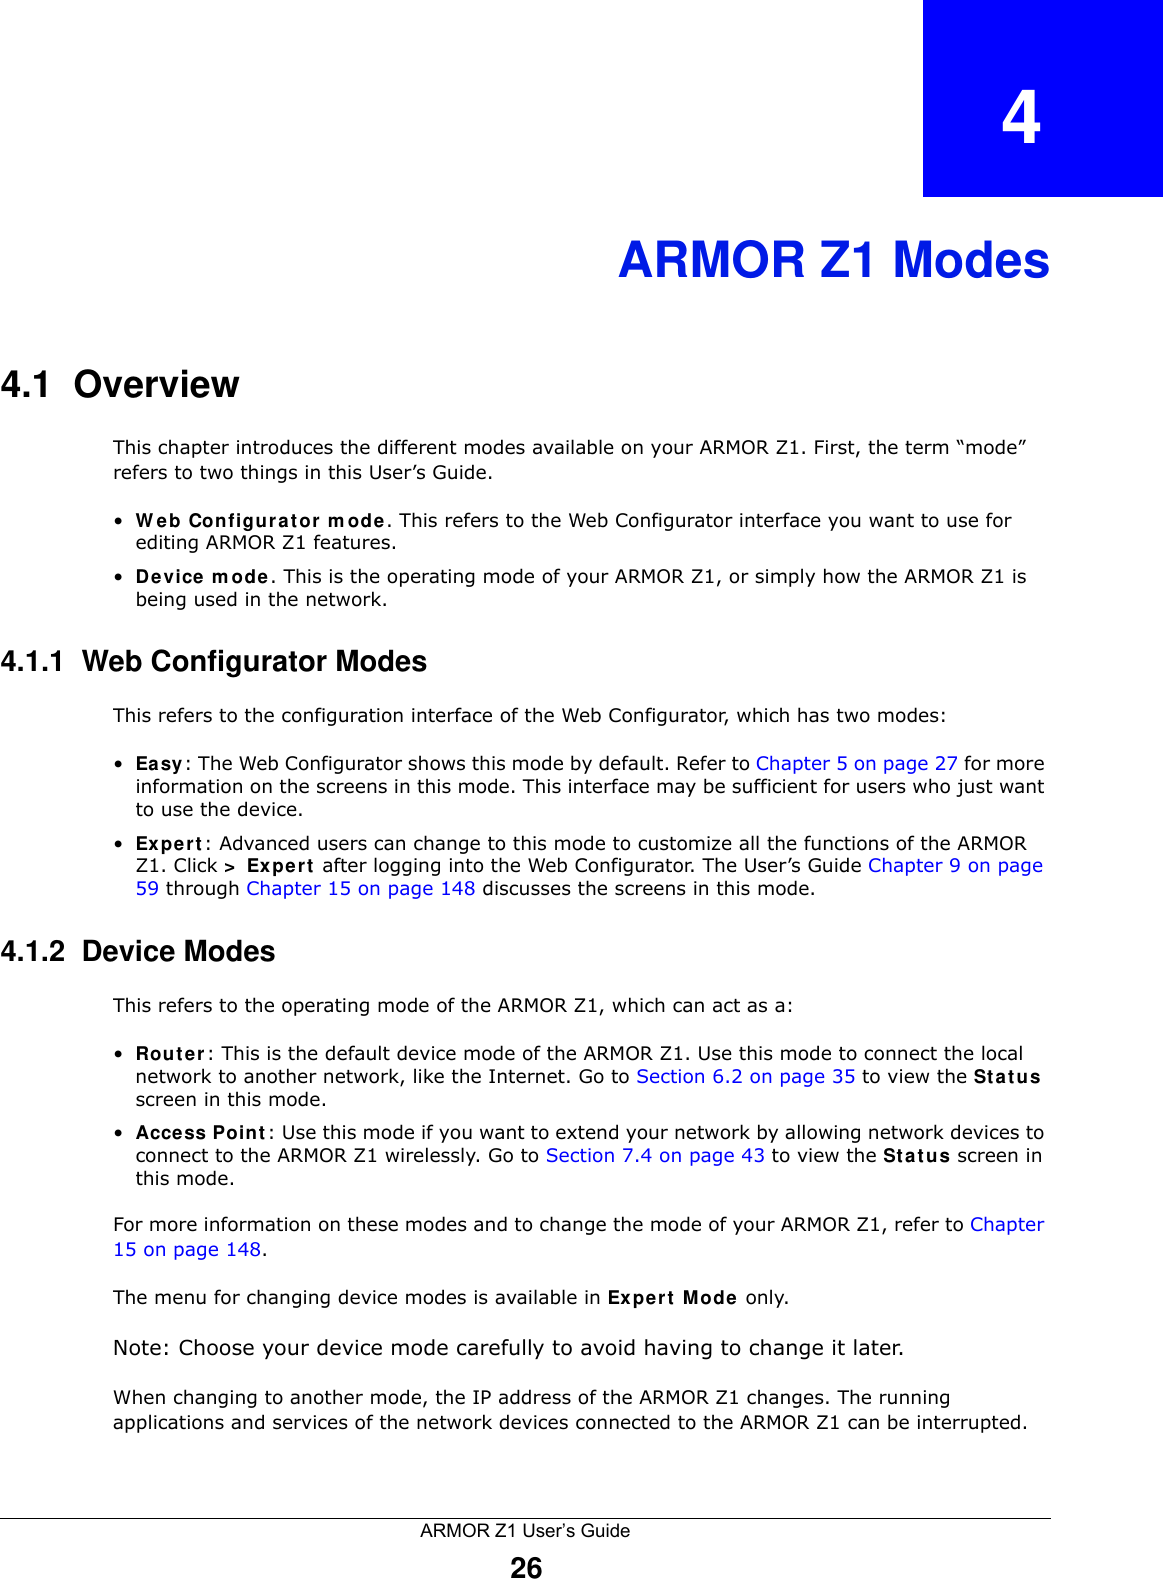 ARMOR Z1 User’s Guide26CHAPTER   4ARMOR Z1 Modes4.1  OverviewThis chapter introduces the different modes available on your ARMOR Z1. First, the term “mode” refers to two things in this User’s Guide.•Web Configurator mode. This refers to the Web Configurator interface you want to use for editing ARMOR Z1 features. •Device mode. This is the operating mode of your ARMOR Z1, or simply how the ARMOR Z1 is being used in the network. 4.1.1  Web Configurator ModesThis refers to the configuration interface of the Web Configurator, which has two modes:•Easy: The Web Configurator shows this mode by default. Refer to Chapter 5 on page 27 for more information on the screens in this mode. This interface may be sufficient for users who just want to use the device.•Expert: Advanced users can change to this mode to customize all the functions of the ARMOR Z1. Click &gt; Expert after logging into the Web Configurator. The User’s Guide Chapter 9 on page 59 through Chapter 15 on page 148 discusses the screens in this mode.4.1.2  Device ModesThis refers to the operating mode of the ARMOR Z1, which can act as a:•Router: This is the default device mode of the ARMOR Z1. Use this mode to connect the local network to another network, like the Internet. Go to Section 6.2 on page 35 to view the Status screen in this mode.•Access Point: Use this mode if you want to extend your network by allowing network devices to connect to the ARMOR Z1 wirelessly. Go to Section 7.4 on page 43 to view the Status screen in this mode.For more information on these modes and to change the mode of your ARMOR Z1, refer to Chapter 15 on page 148.The menu for changing device modes is available in Expert Mode only. Note: Choose your device mode carefully to avoid having to change it later.When changing to another mode, the IP address of the ARMOR Z1 changes. The running applications and services of the network devices connected to the ARMOR Z1 can be interrupted. 